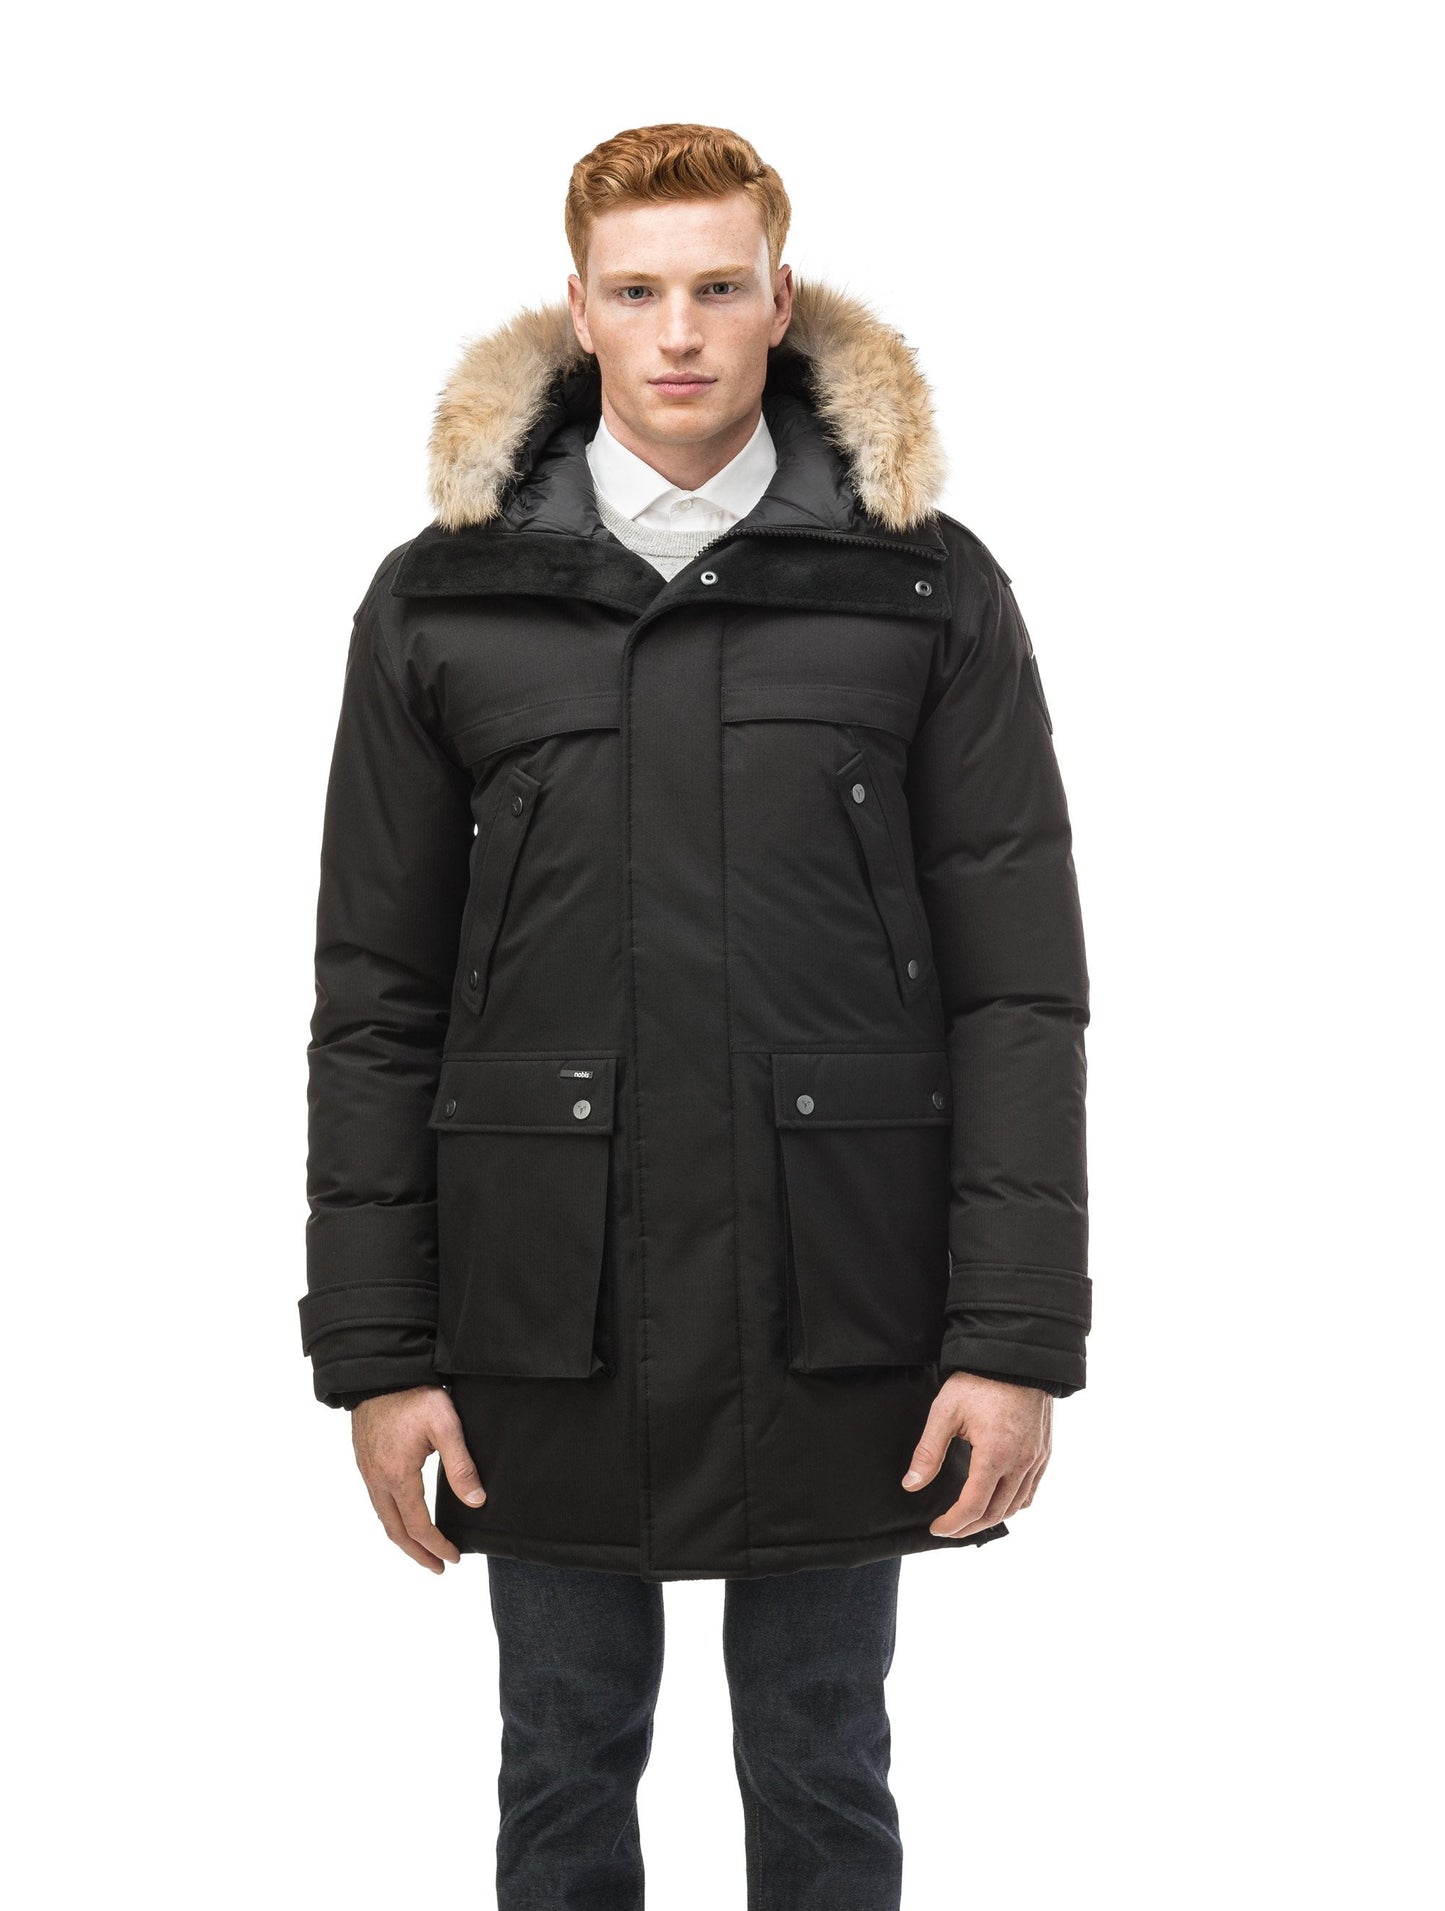 Men's Best Selling Parka the Yatesy is a down filled jacket with a zipper closure and magnetic placket in CH Black